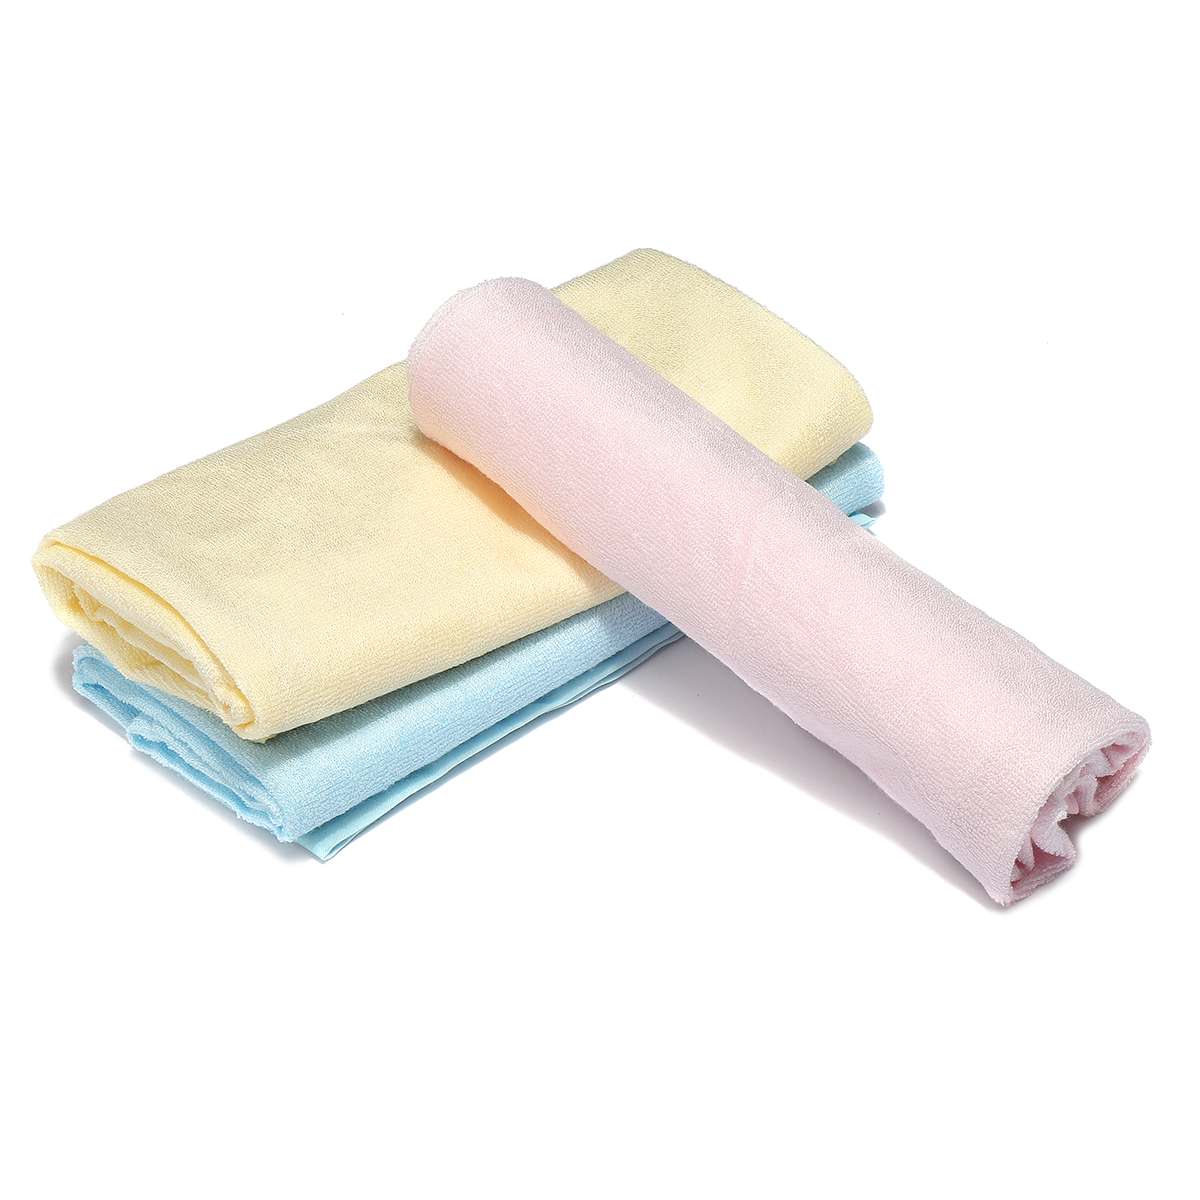 Baby Child Kids Elder Waterproof Washable Reusable Bed Pad Incontinence Bed Wetting Mattress Cover Protect 3 Colors 7 Sizes